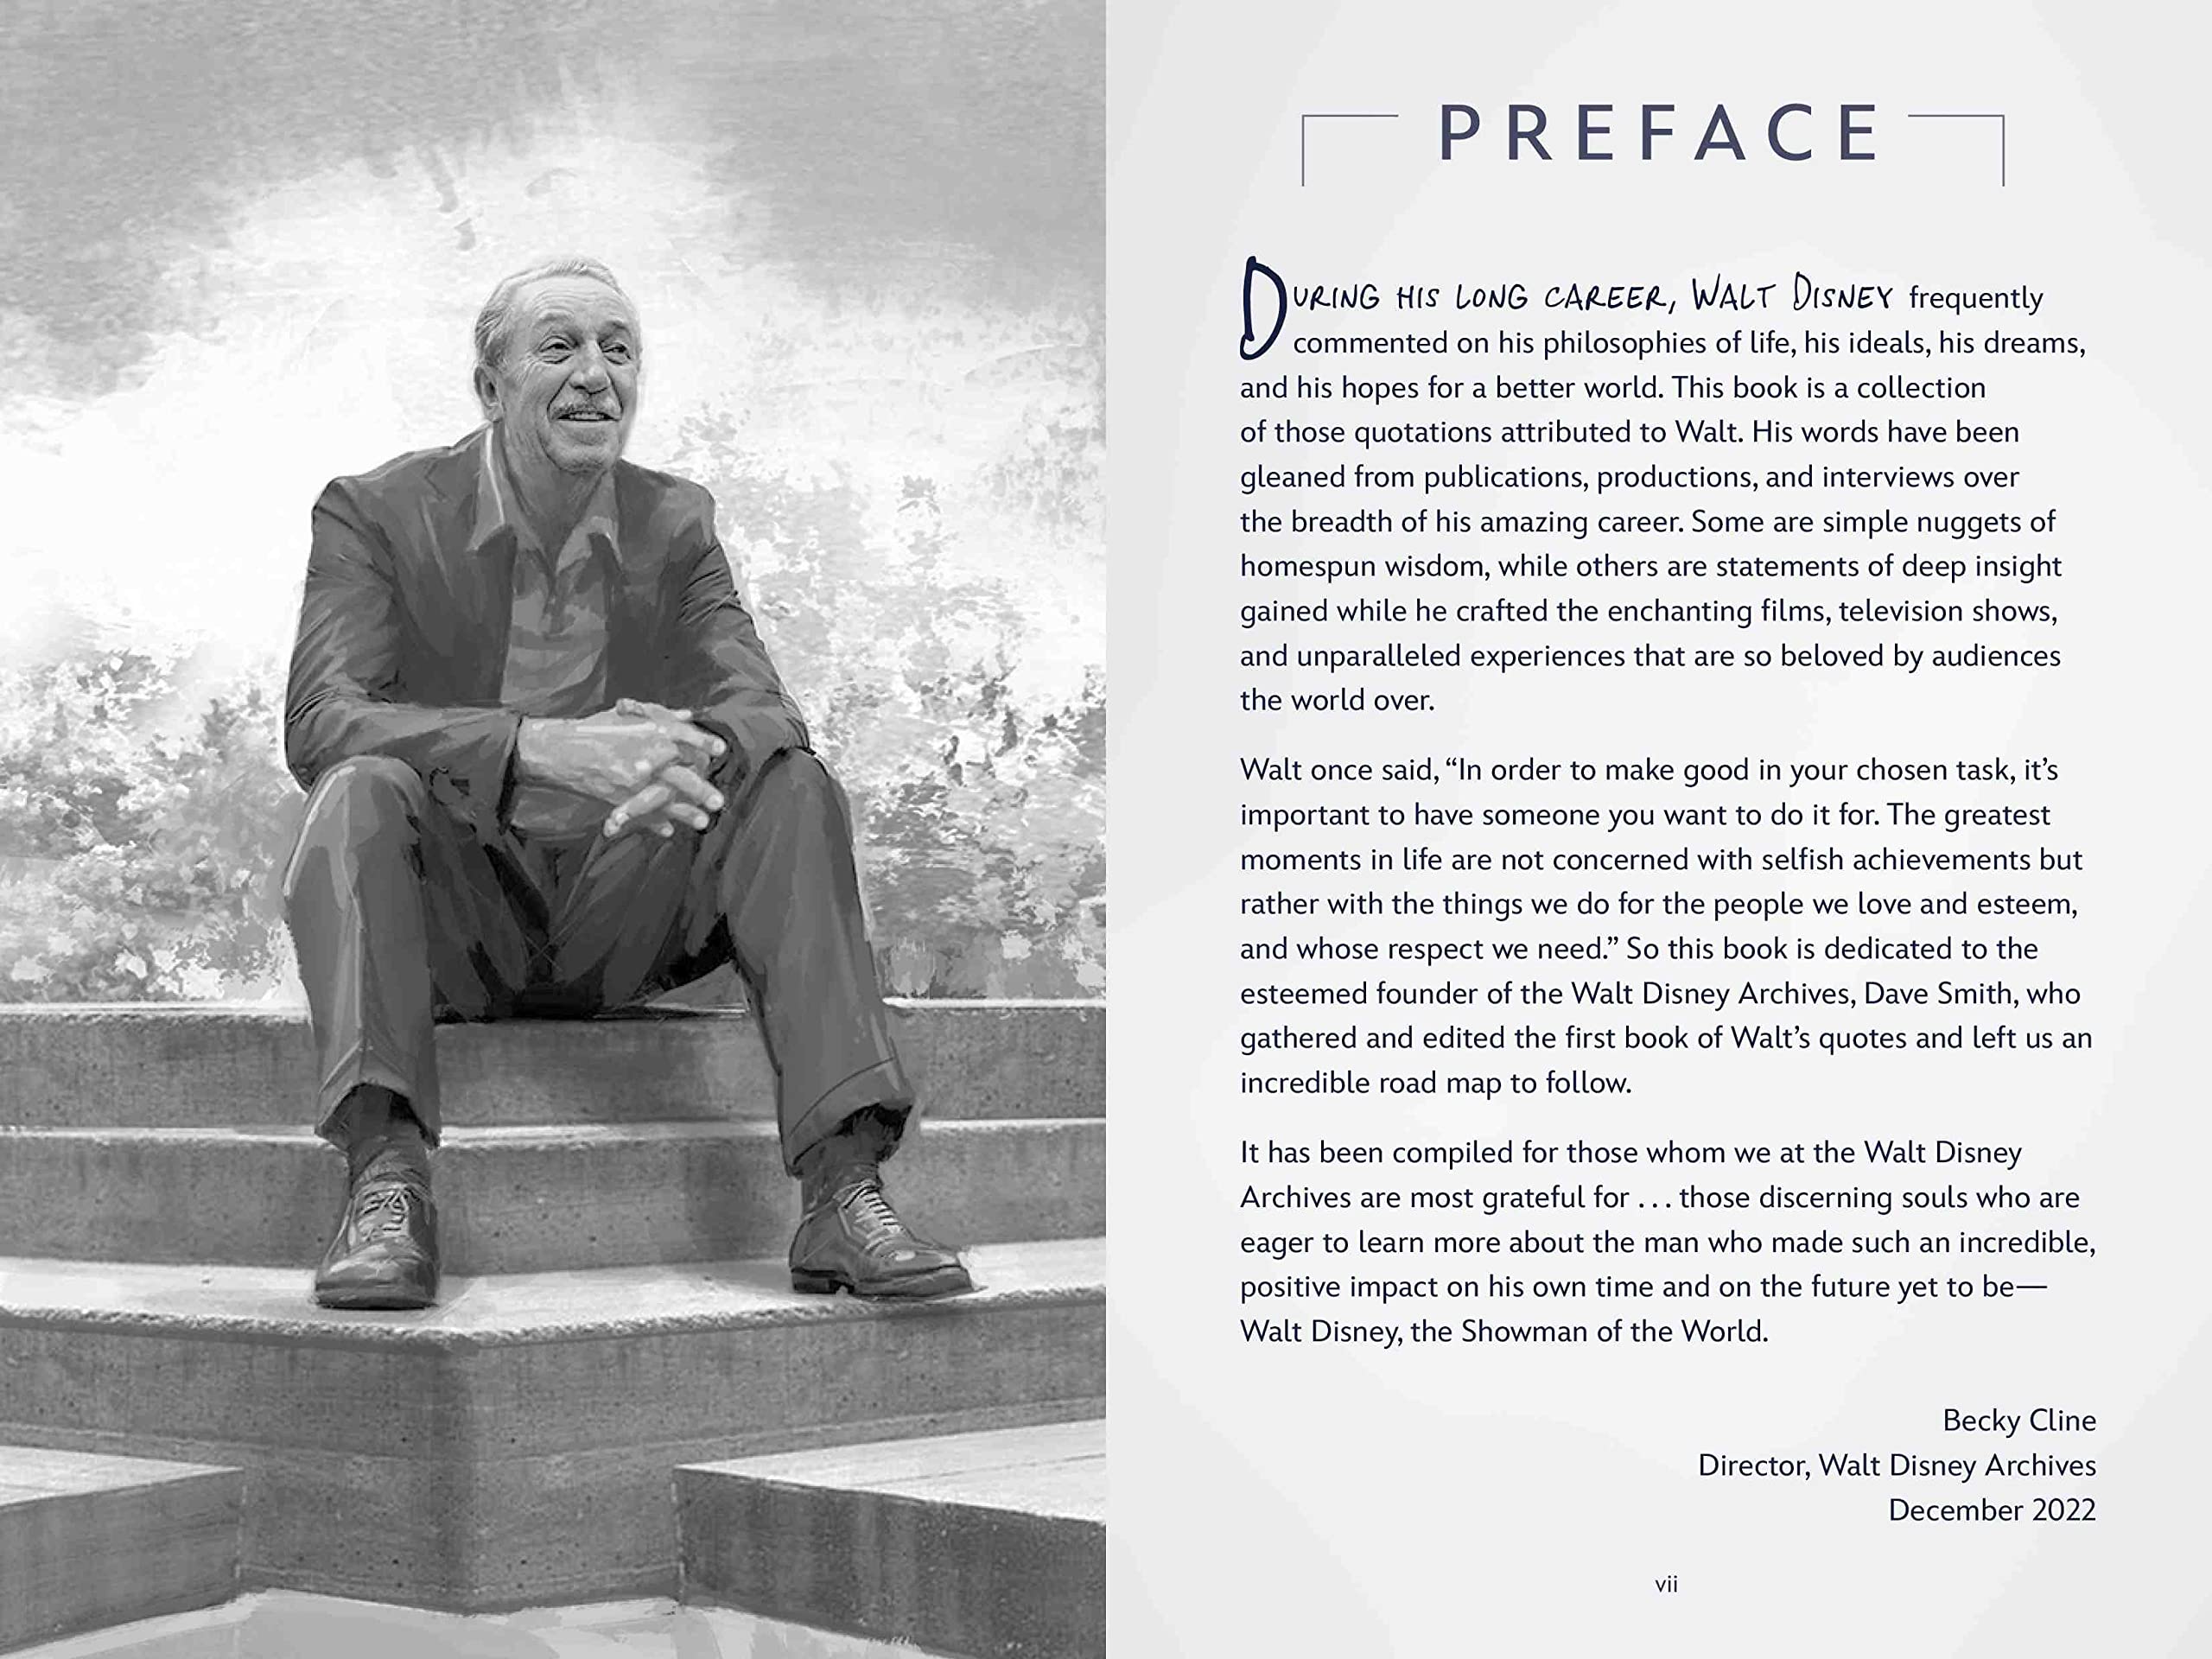 The Official Walt Disney Quote Book (Disney Editions Deluxe)